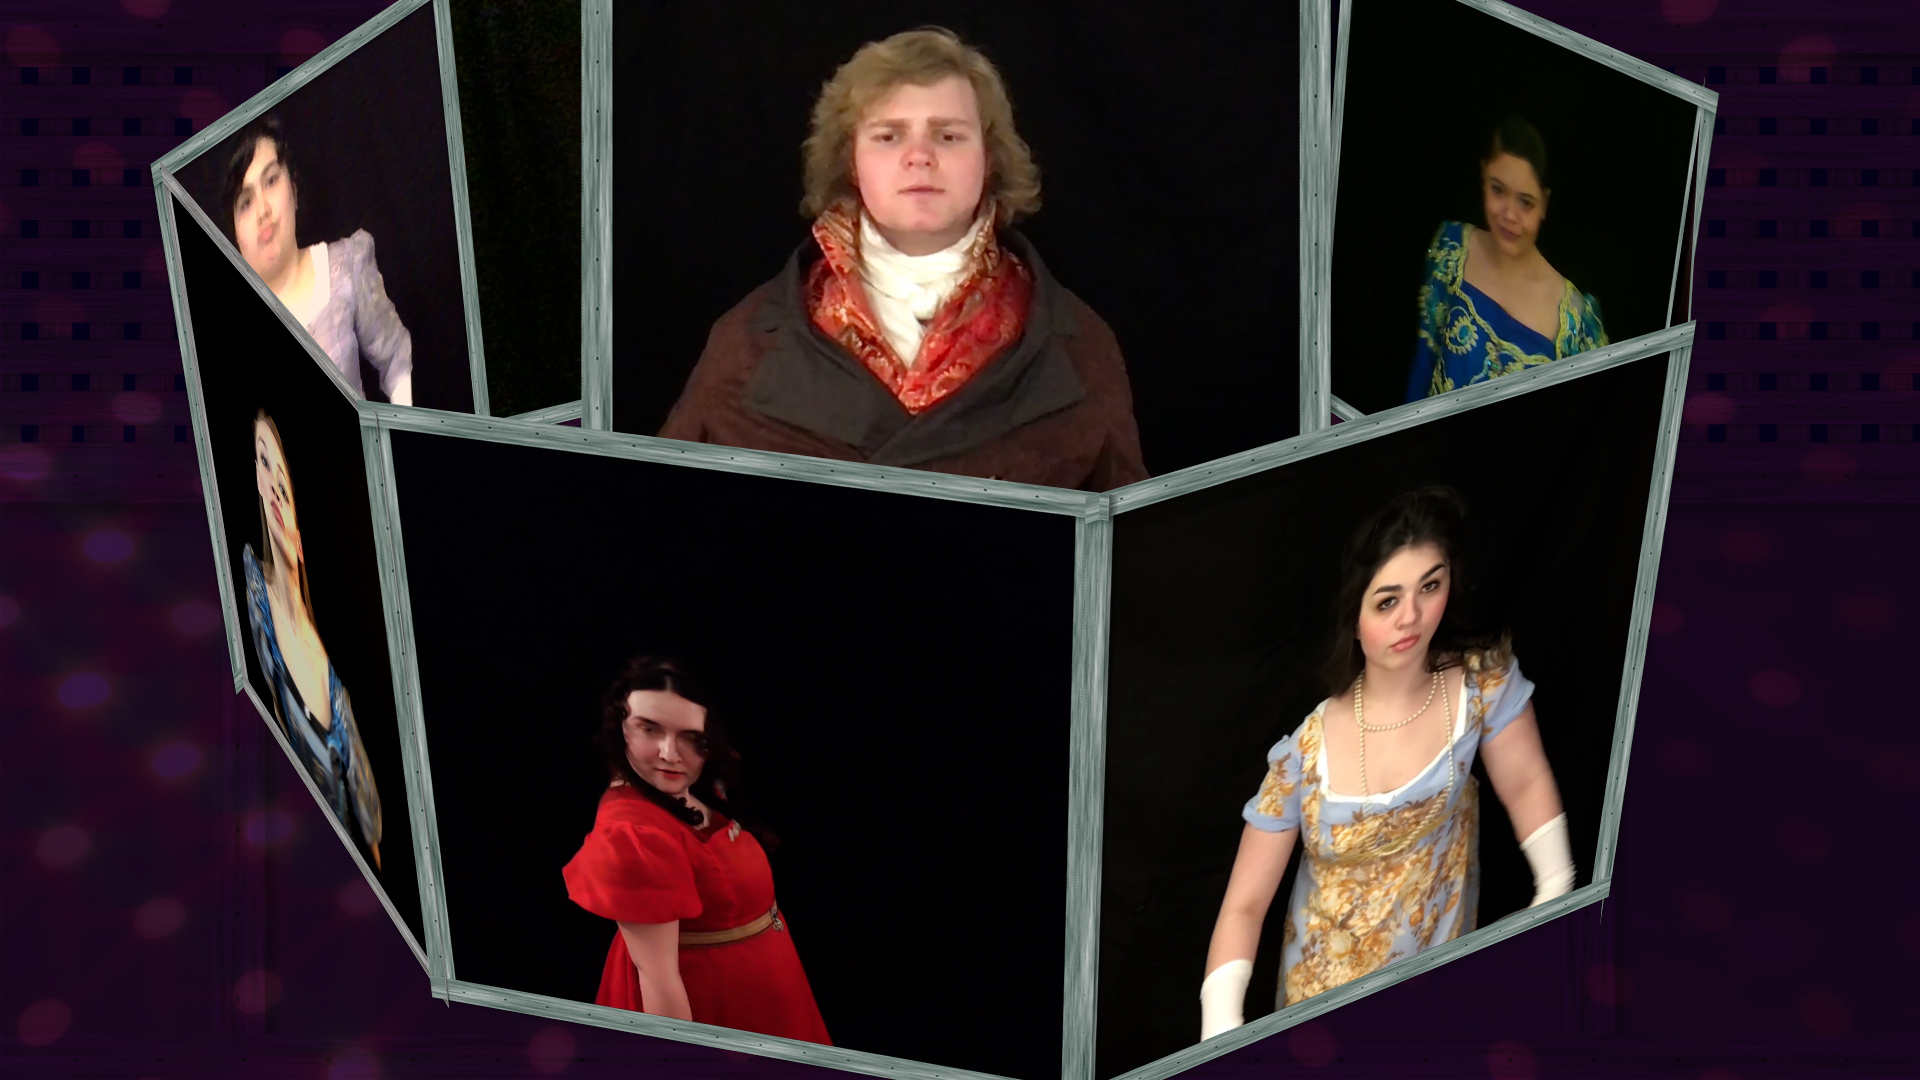 A virtual cast performing Pride and Prejudice during the COVID 19 pandemic.